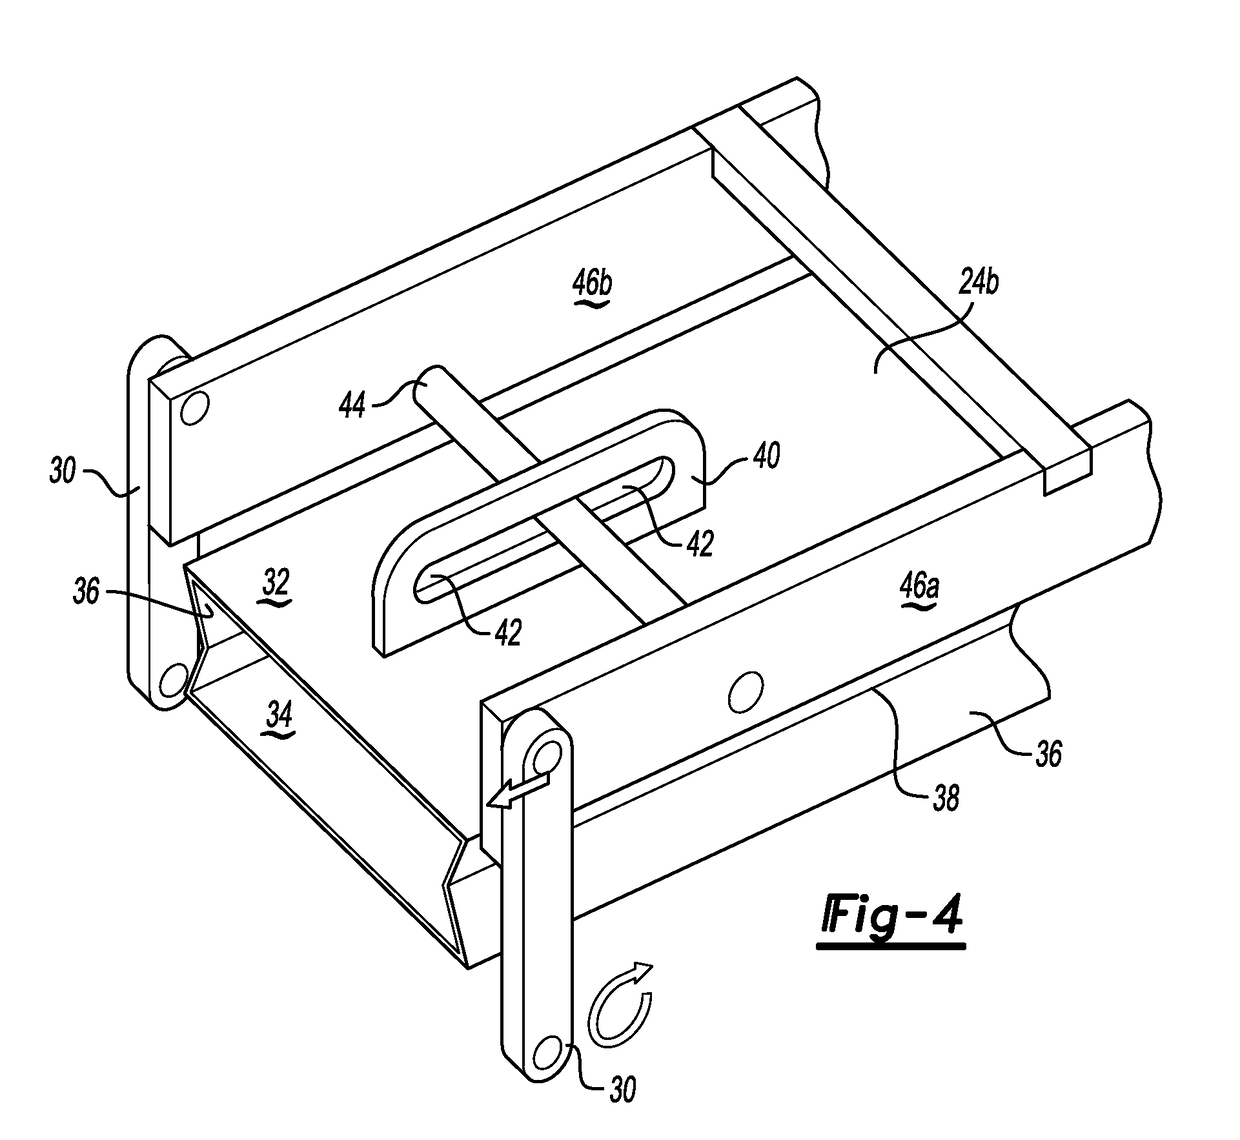 Collapsible under-seat exhaust duct for battery compartment